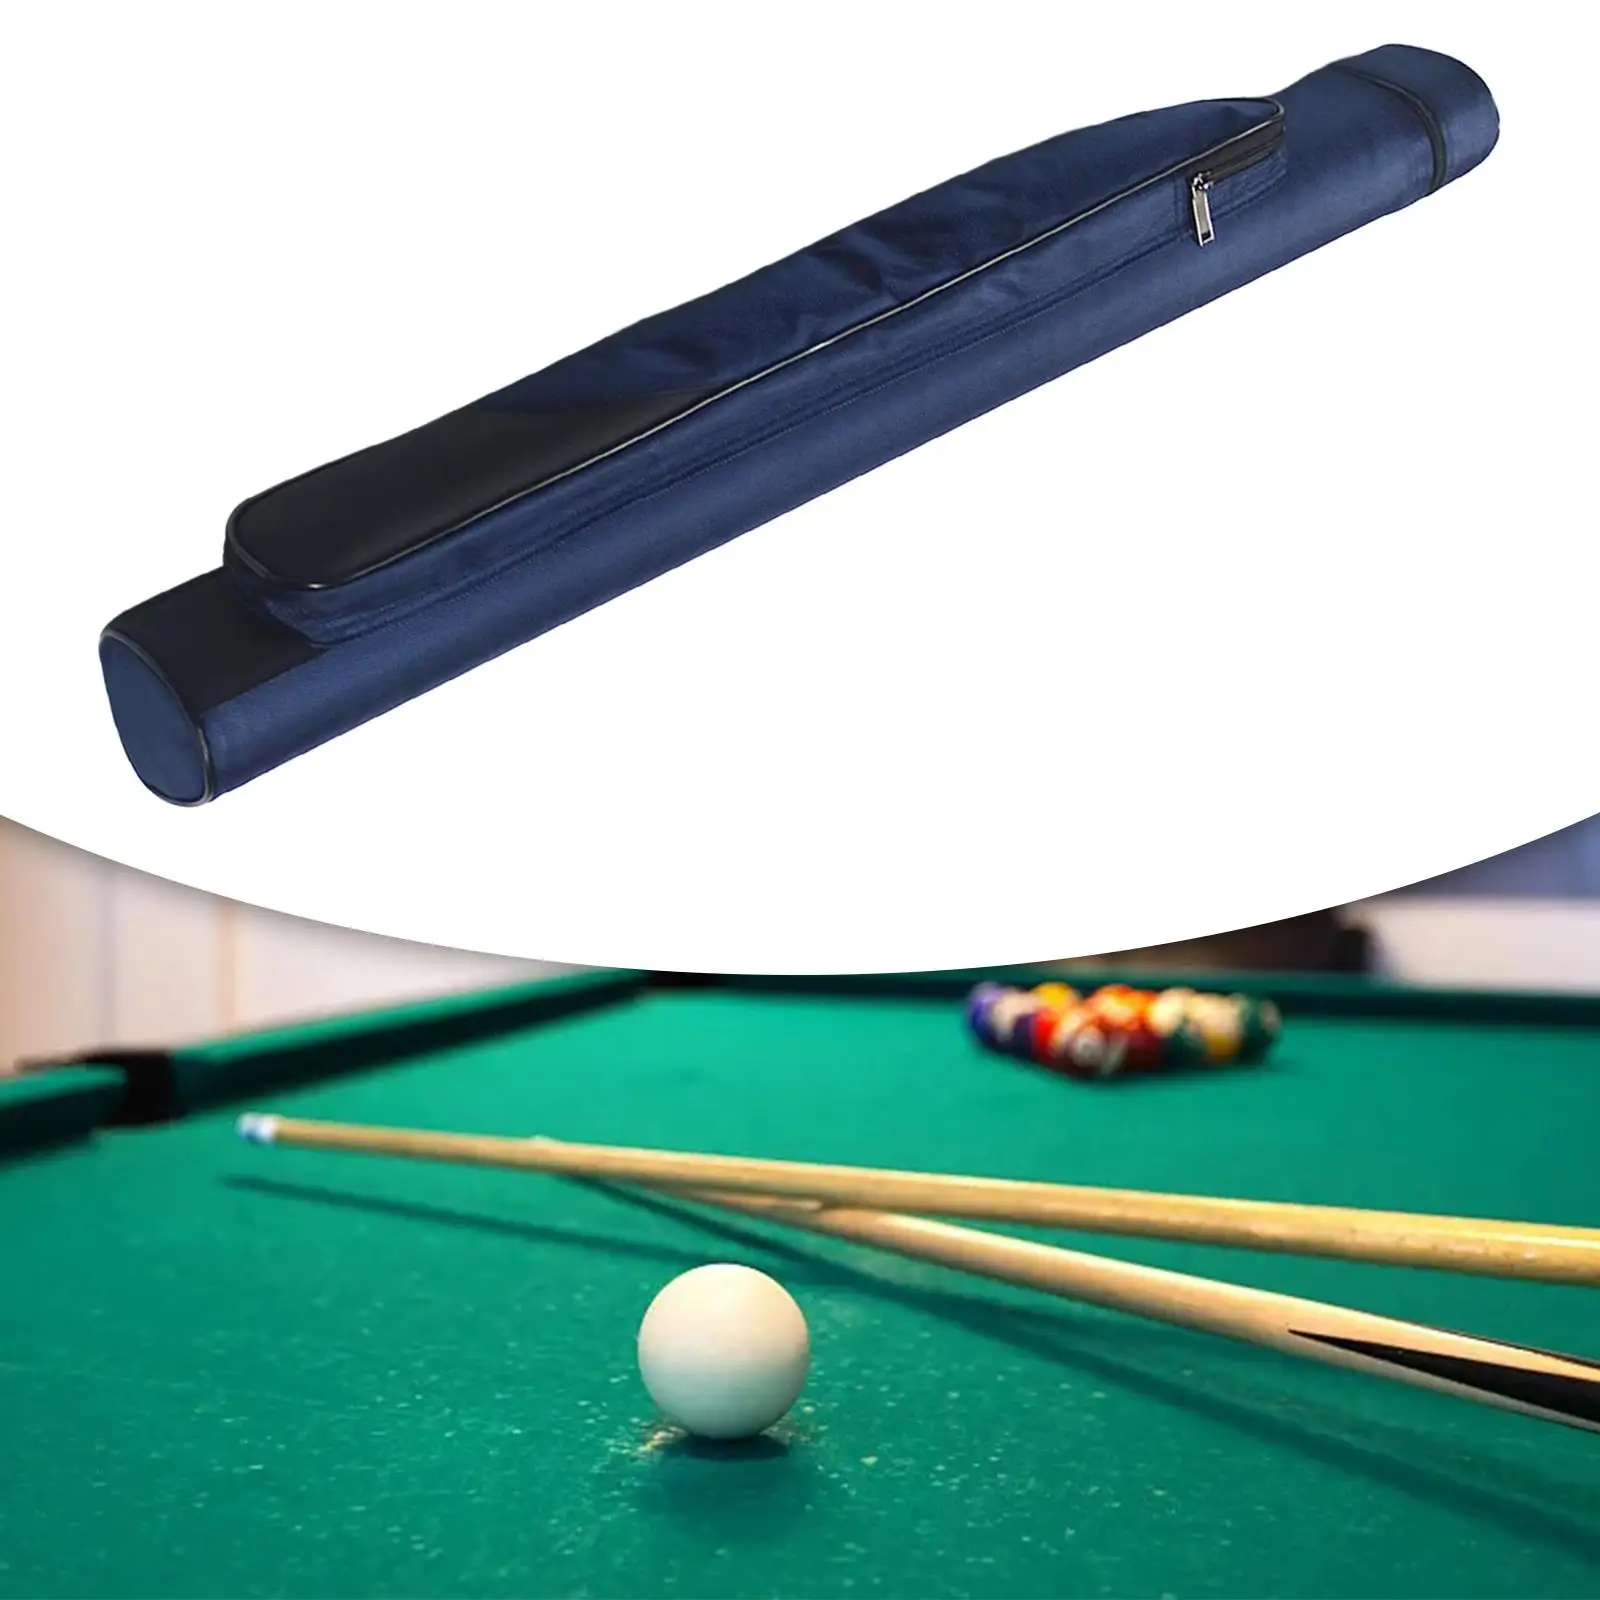 Pool Cue of Case Lightweight Professional Billiard Pool Cue Stick Carrying Bag